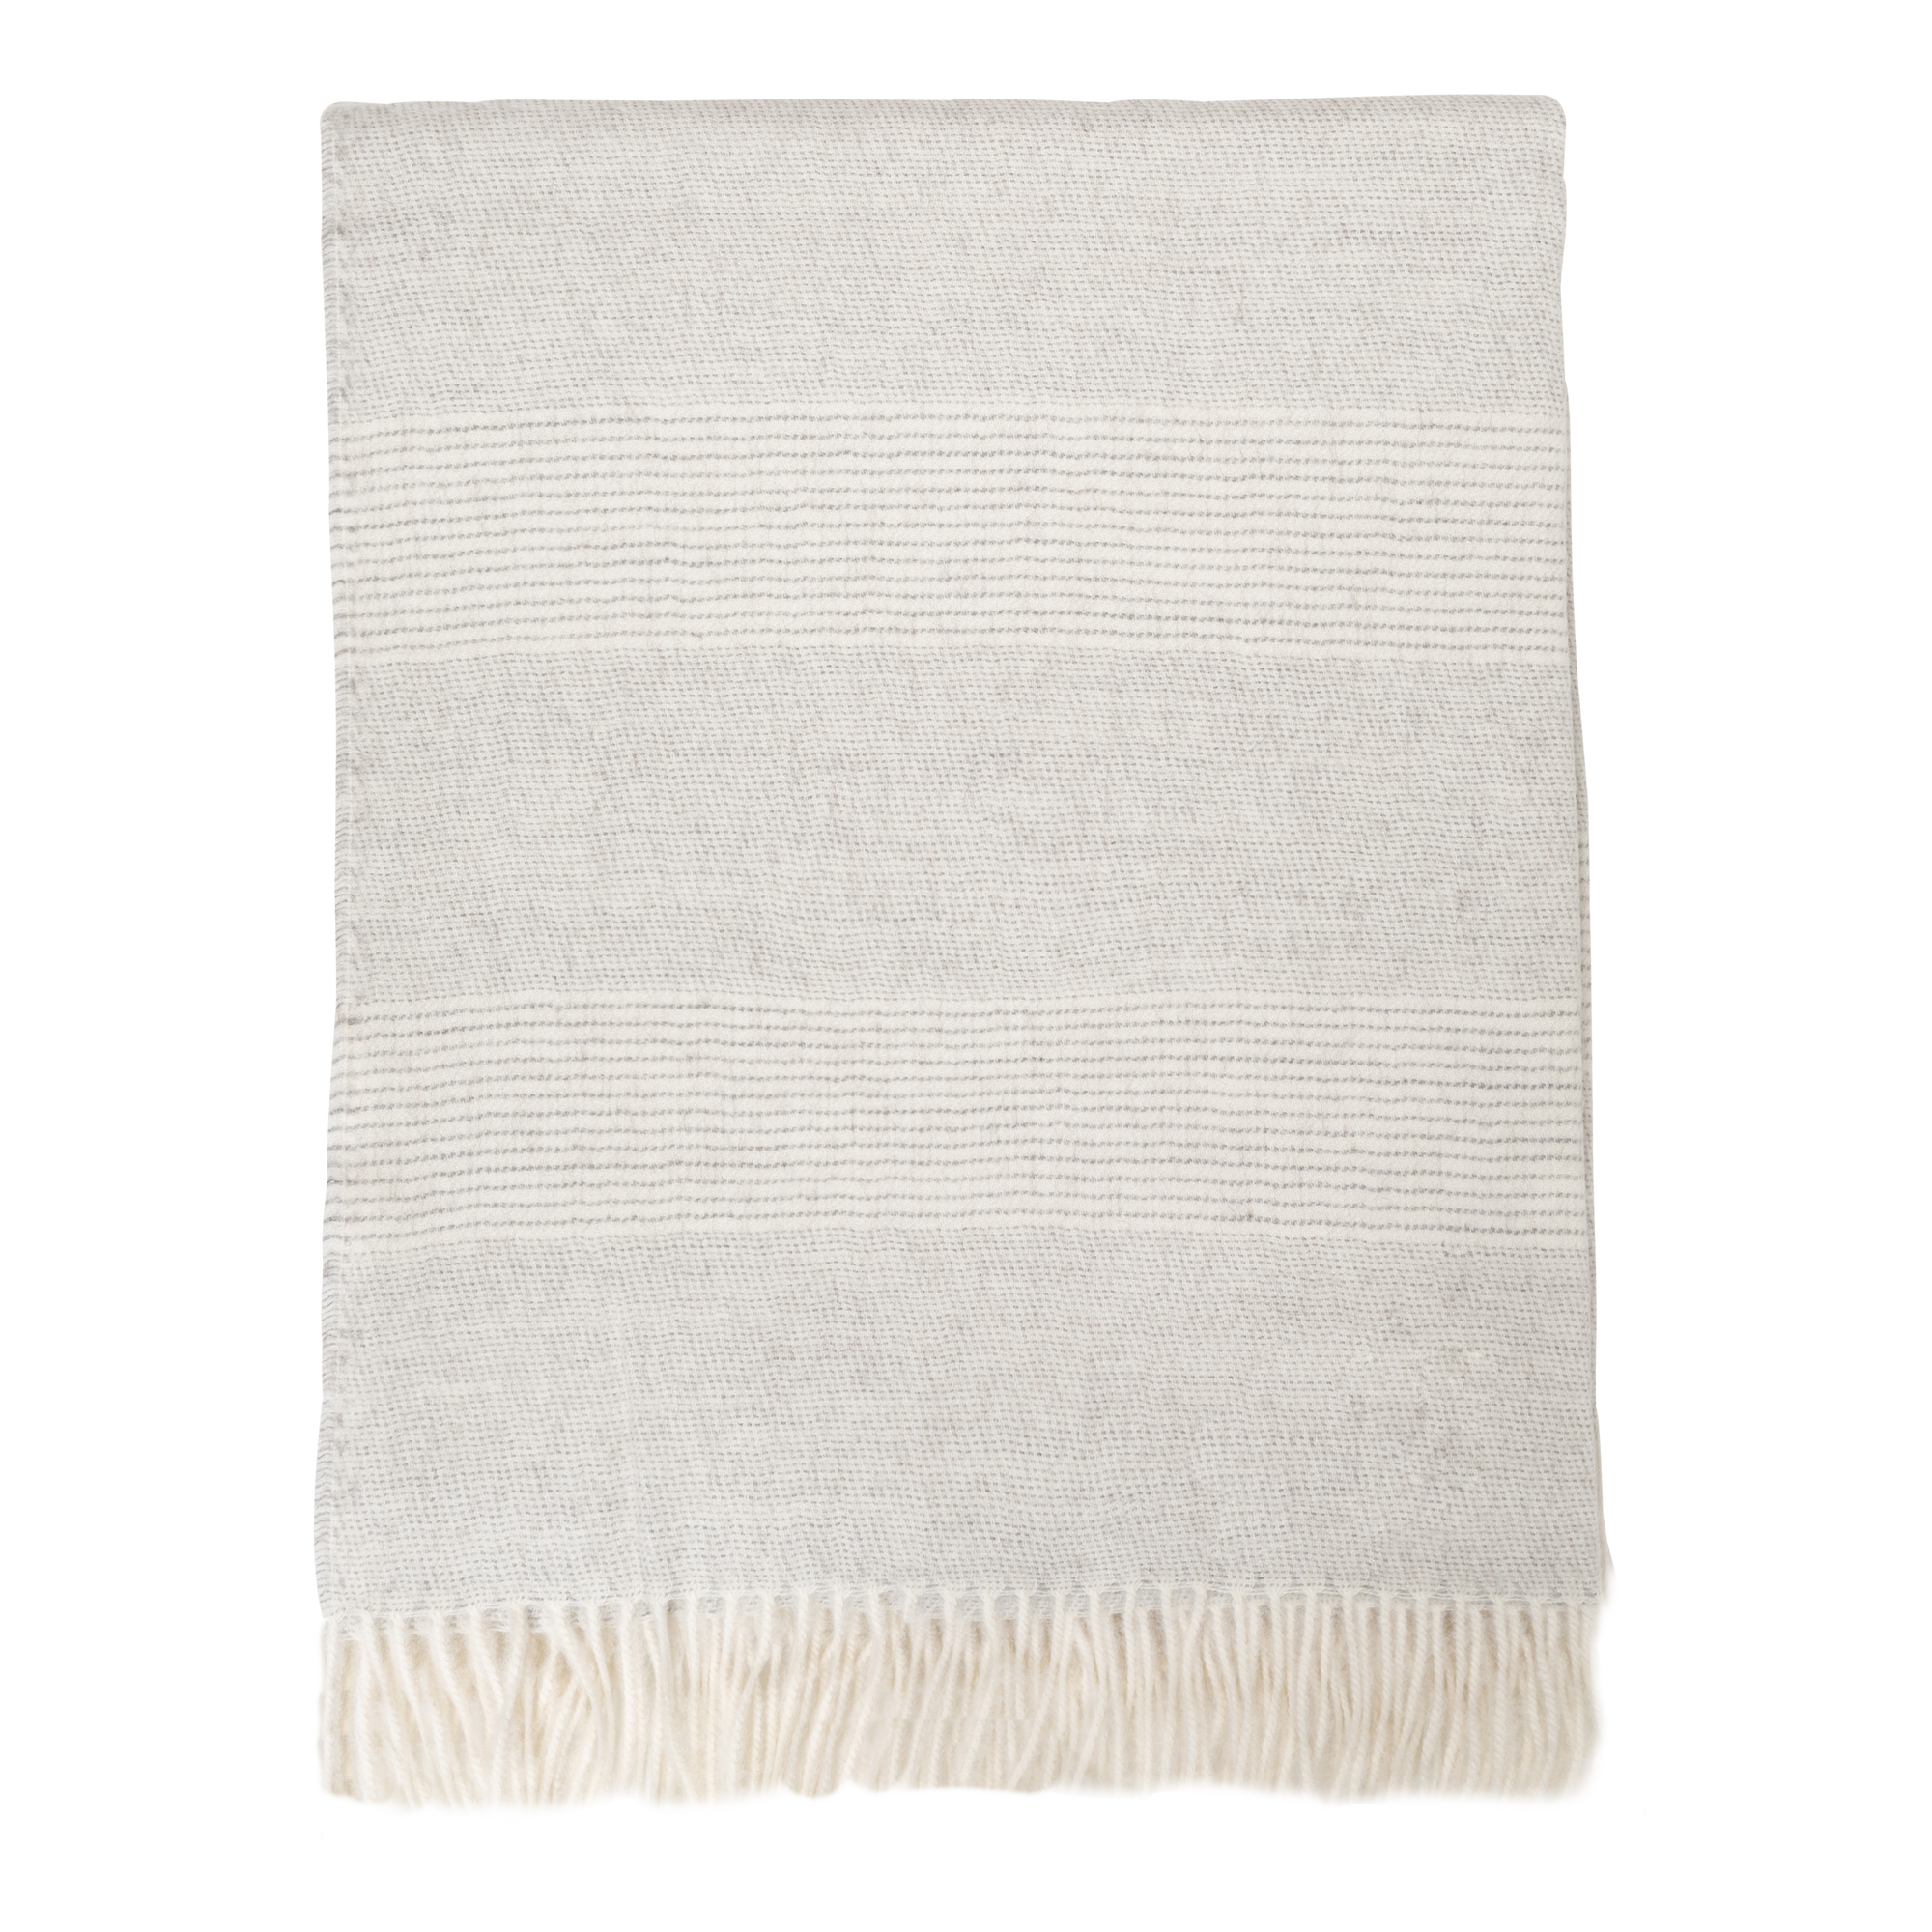 The soft and light texture of the Baby Alpaca Throw adds a touch of luxury to any room.